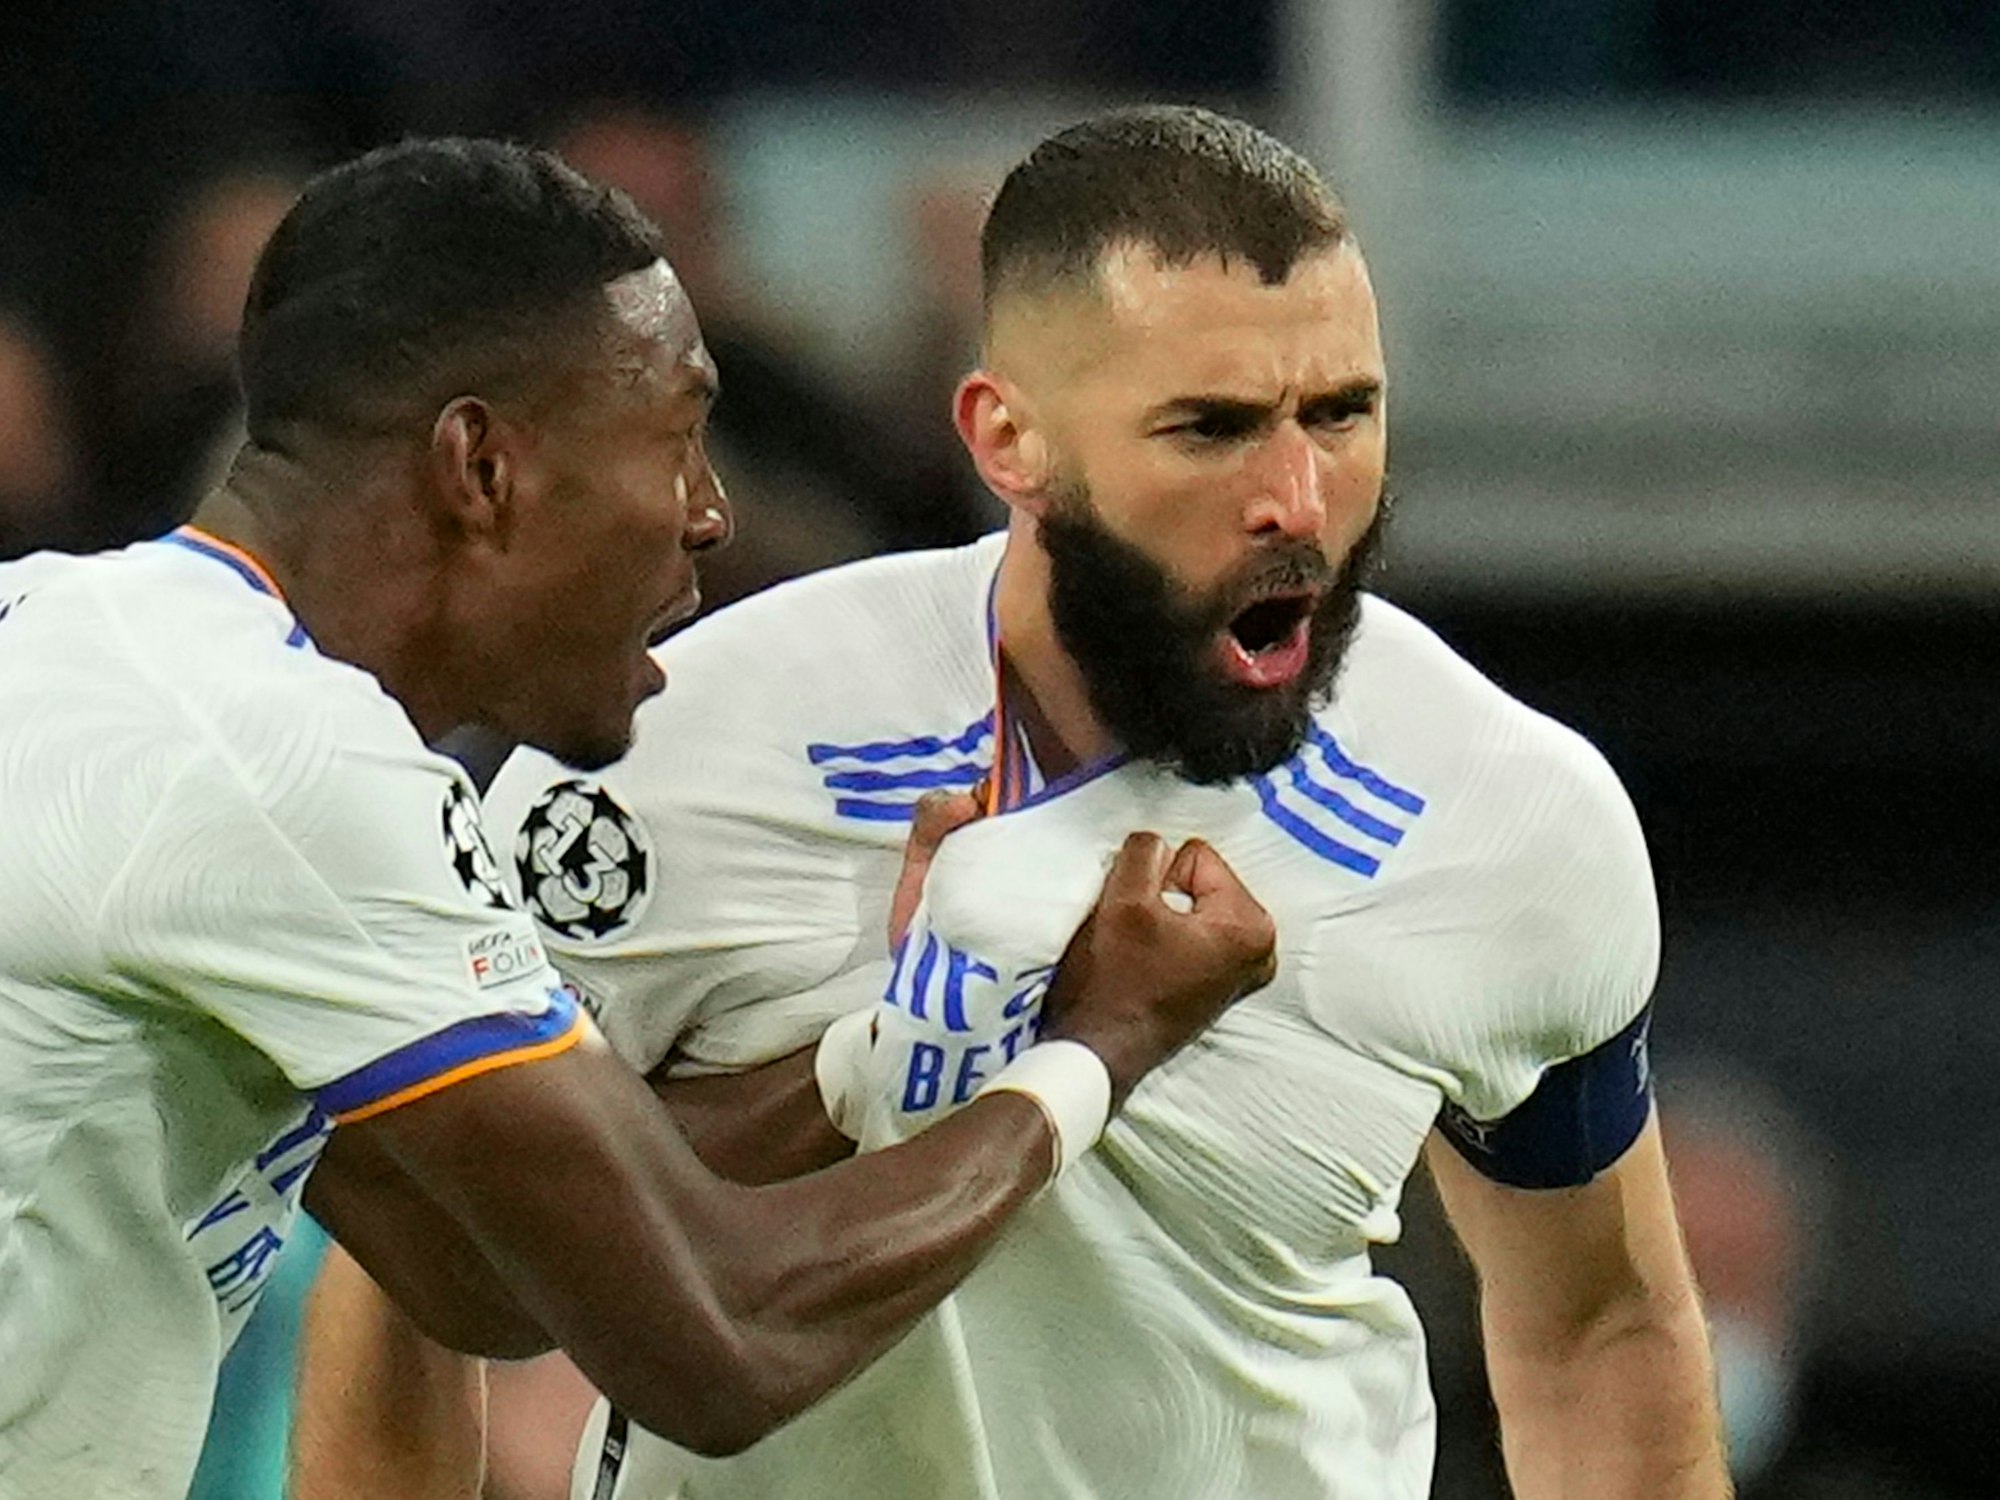 Real Madrid's David Alaba celebrates with Karim Benzema, right, who scored his side's first goal during the Champions League, round of 16, second leg soccer match between Real Madrid and Paris Saint-Germain at the Santiago Bernabeu stadium in Madrid, Spain, Wednesday, March 9, 2022. (AP Photo/Manu Fernandez)